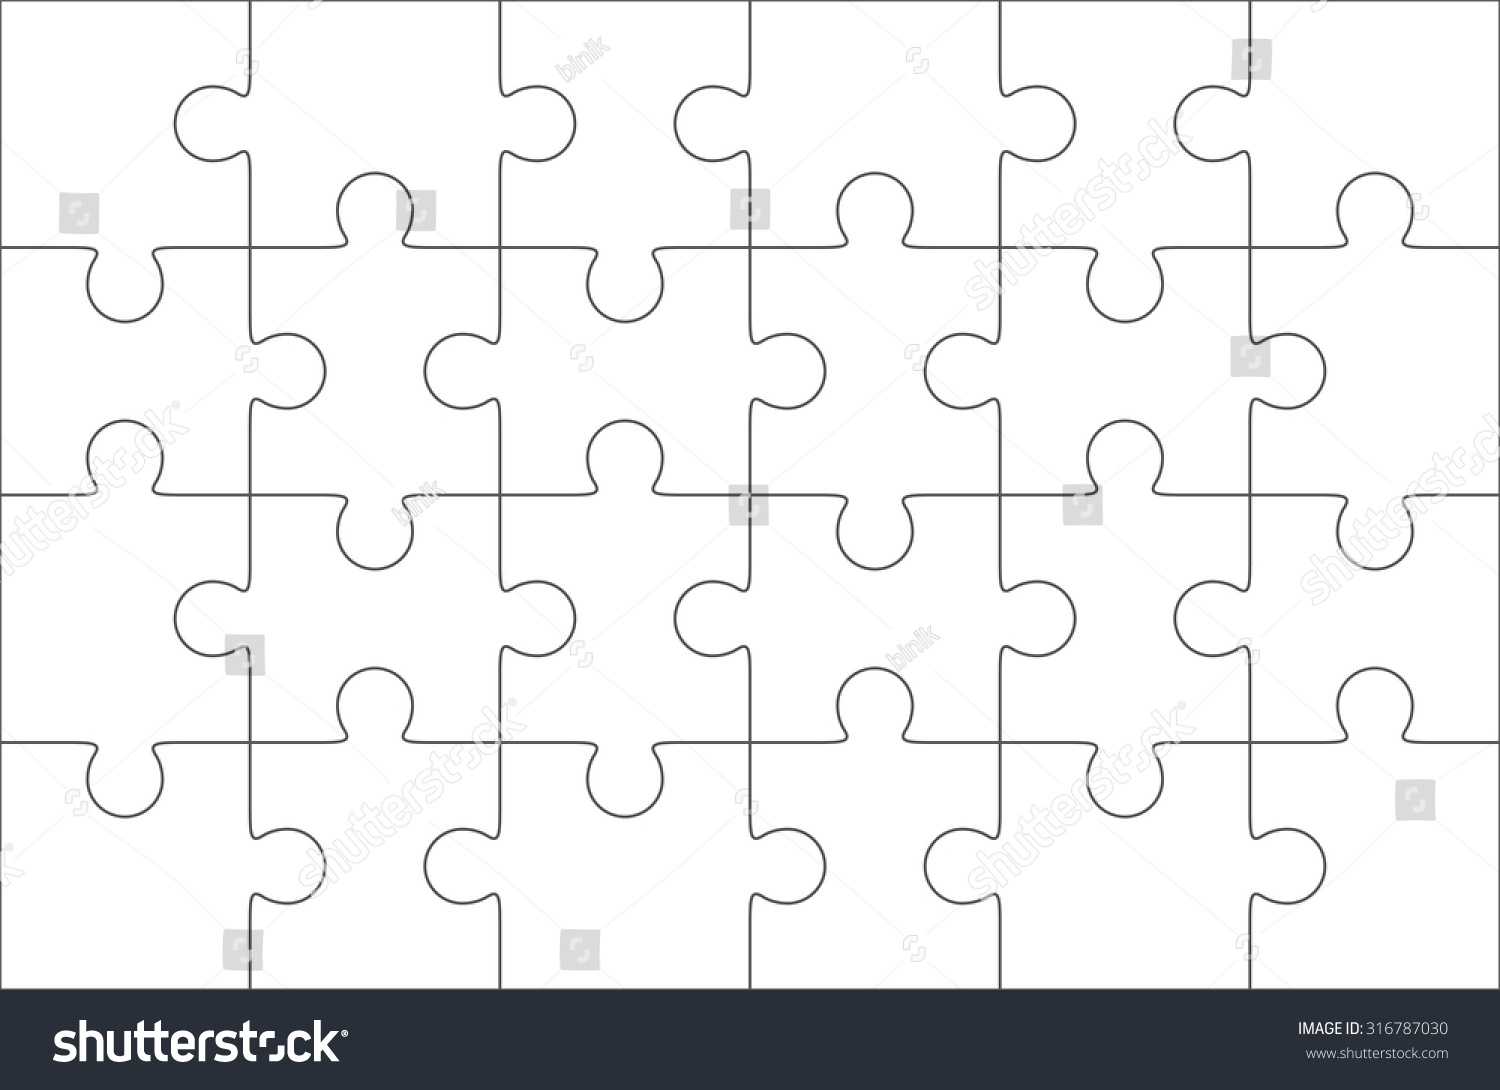 Jigsaw Puzzle Blank Template 6X4 Elements Stock Vector Pertaining To Blank Jigsaw Piece Template